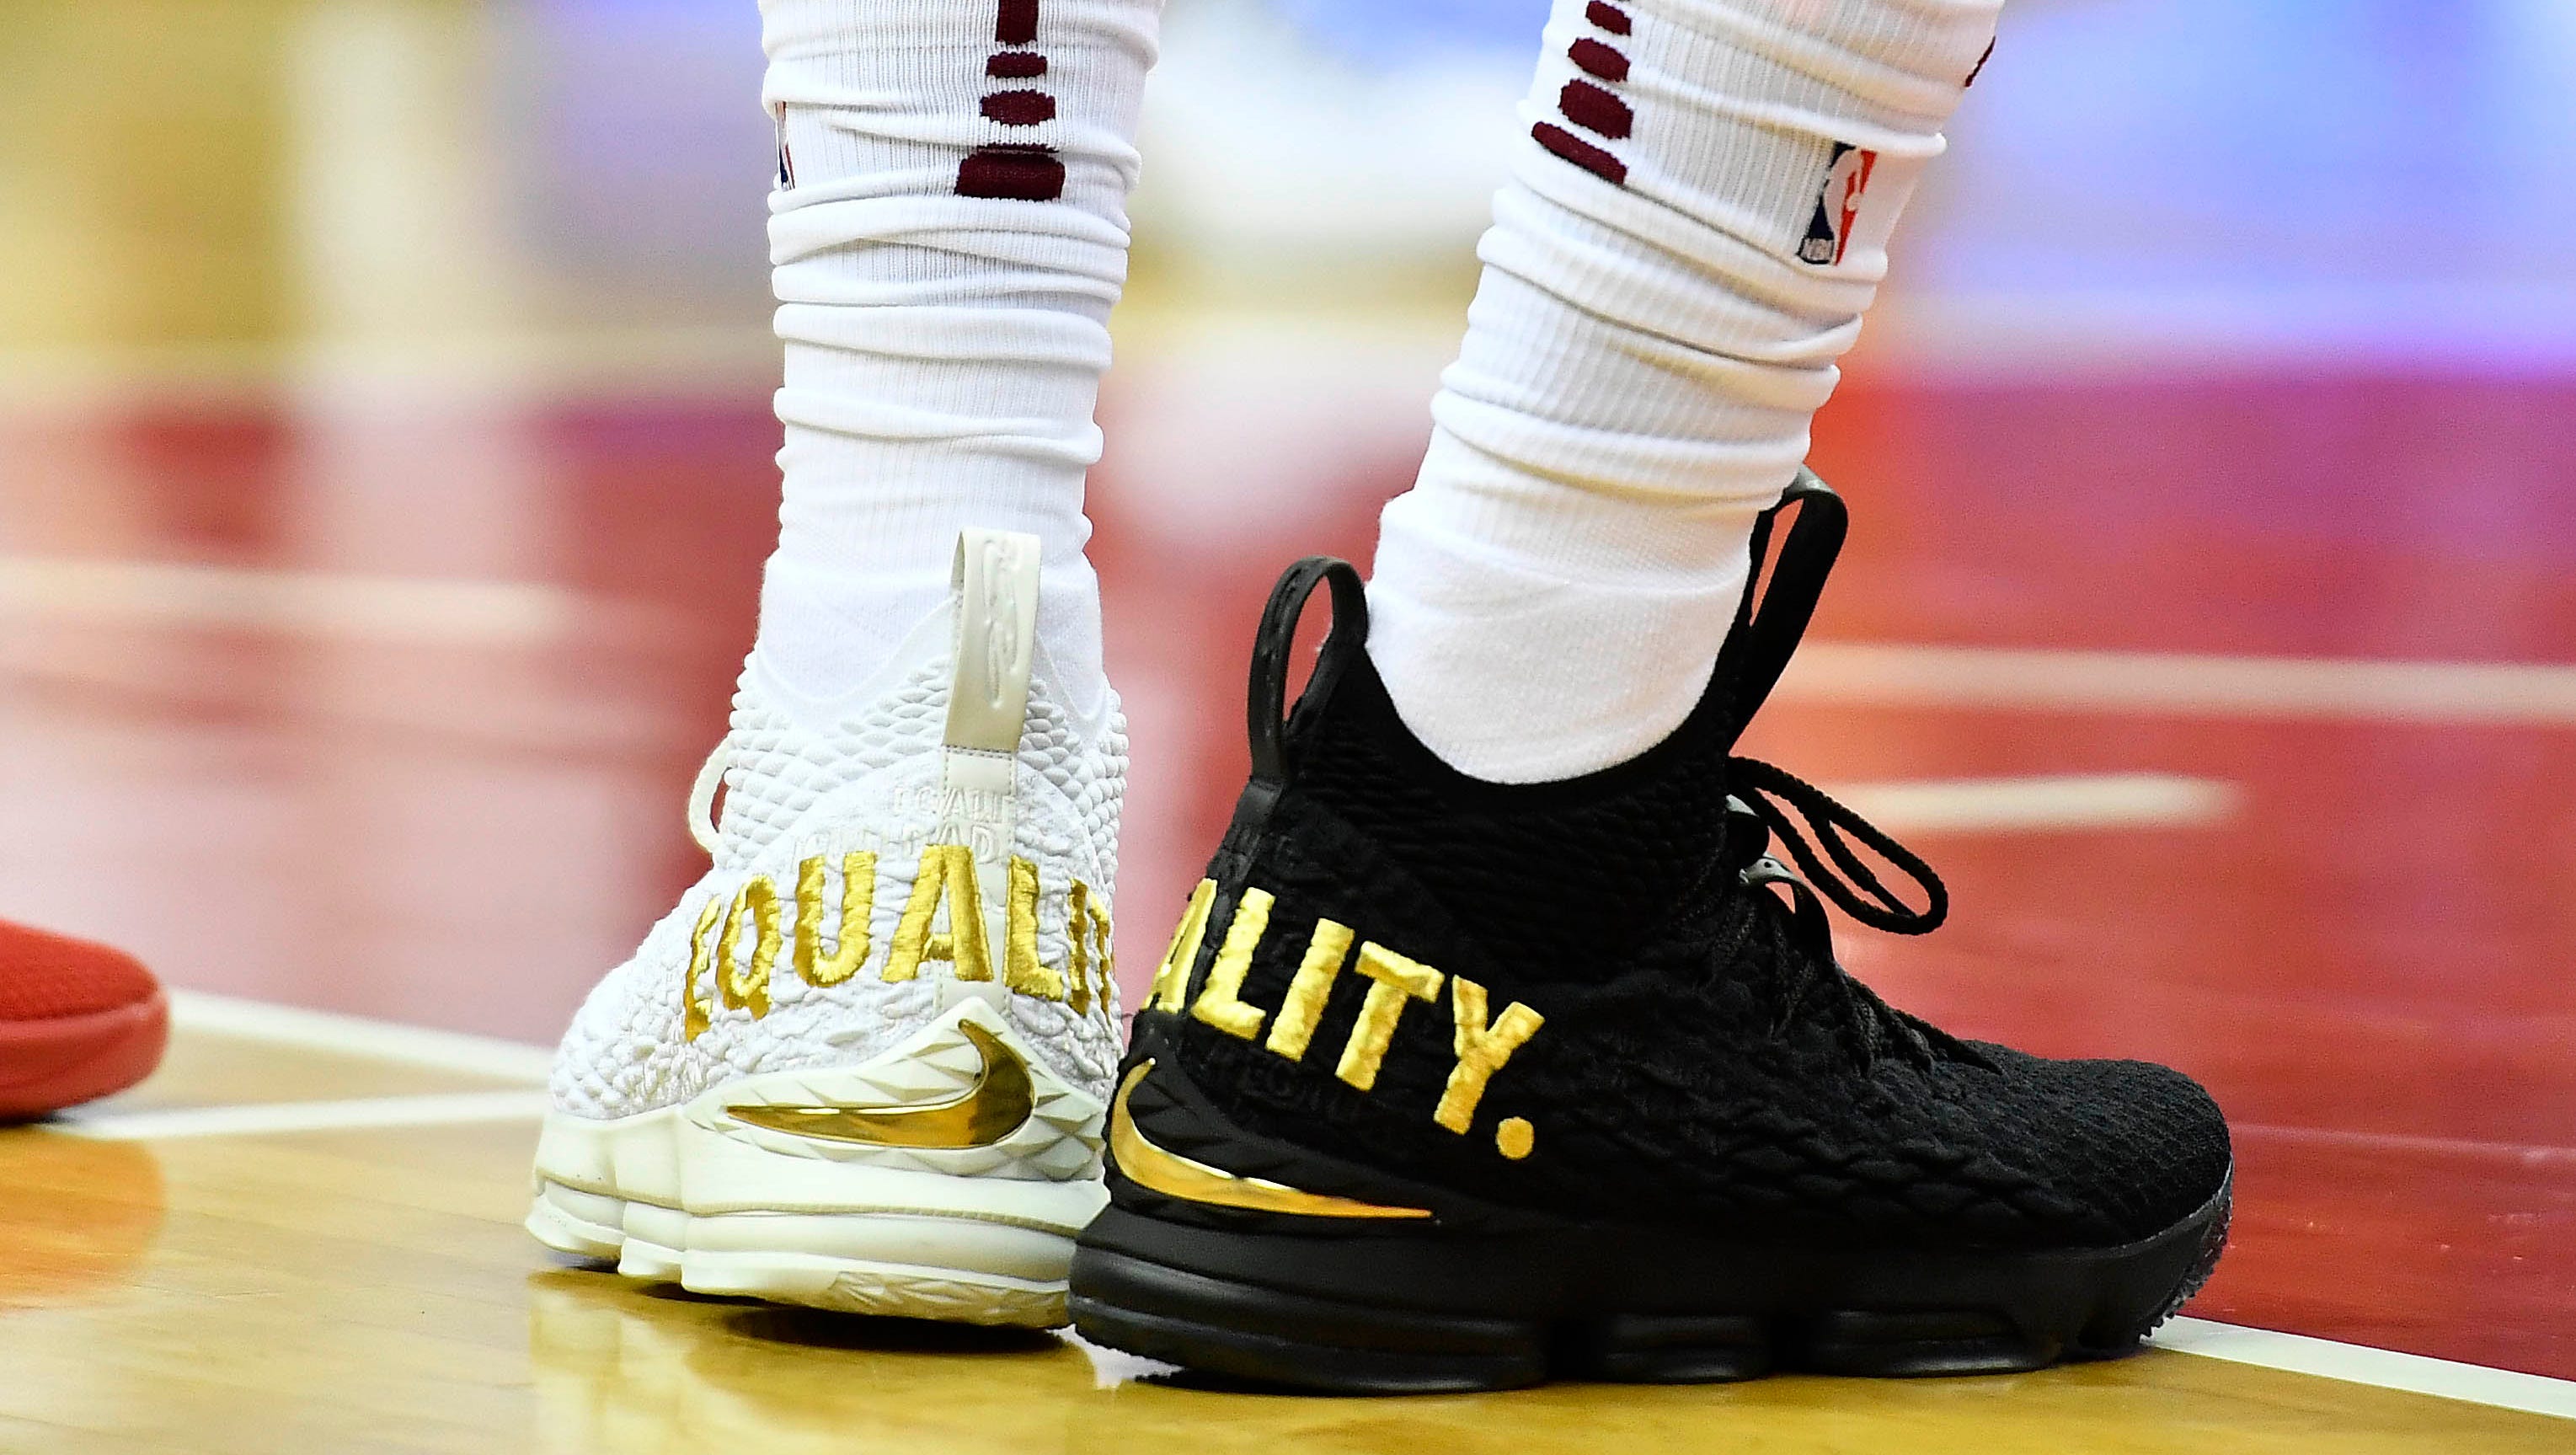 Brick bison Retire LeBron James makes statement with 'Equality' sneakers worn in D.C.